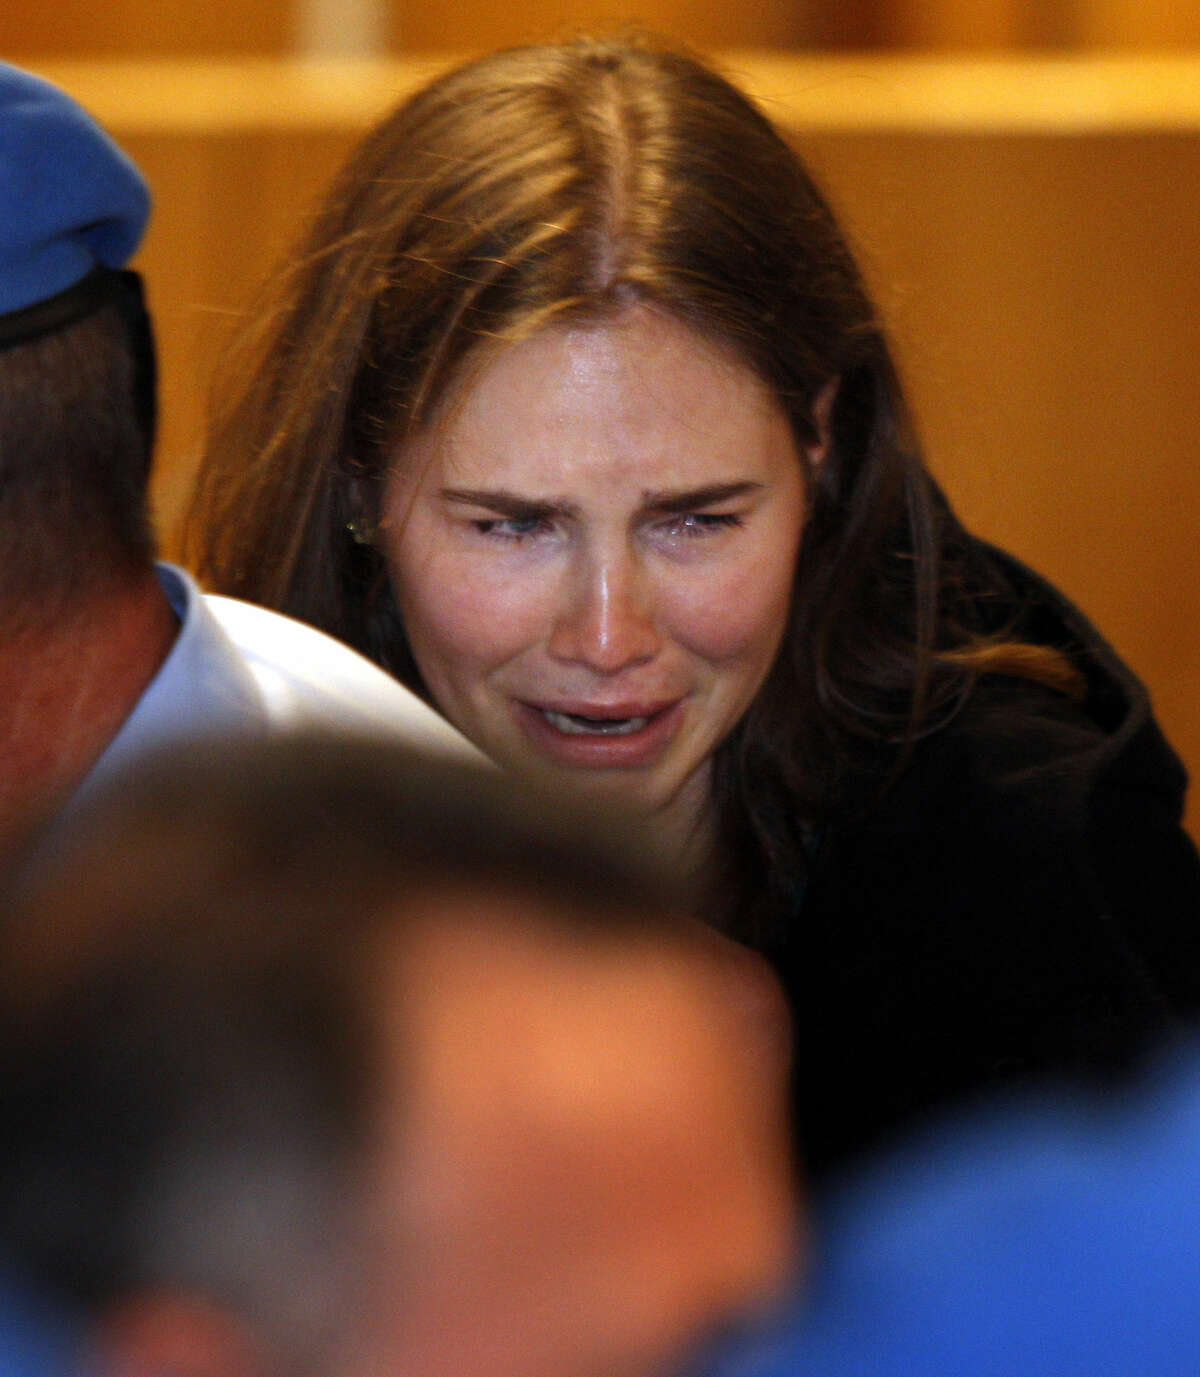 Amanda Knox breaks in tears after hearing the verdict that overturns her conviction and acquits her of murdering her British roommate Meredith Kercher, at the Perugia court, central Italy, Monday, Oct. 3, 2011. Italian appeals court threw out Amanda Knox's murder conviction Monday and ordered the young American freed after nearly four years in prison for the death of her British roommate Knox collapsed in tears after the verdict overturning her 2009 conviction was read out. Her co-defendant, Italian Raffaele Sollecito, also was cleared of killing 21-year-old Meredith Kercher in 2007. (AP Photo/Pier Paolo Cito)